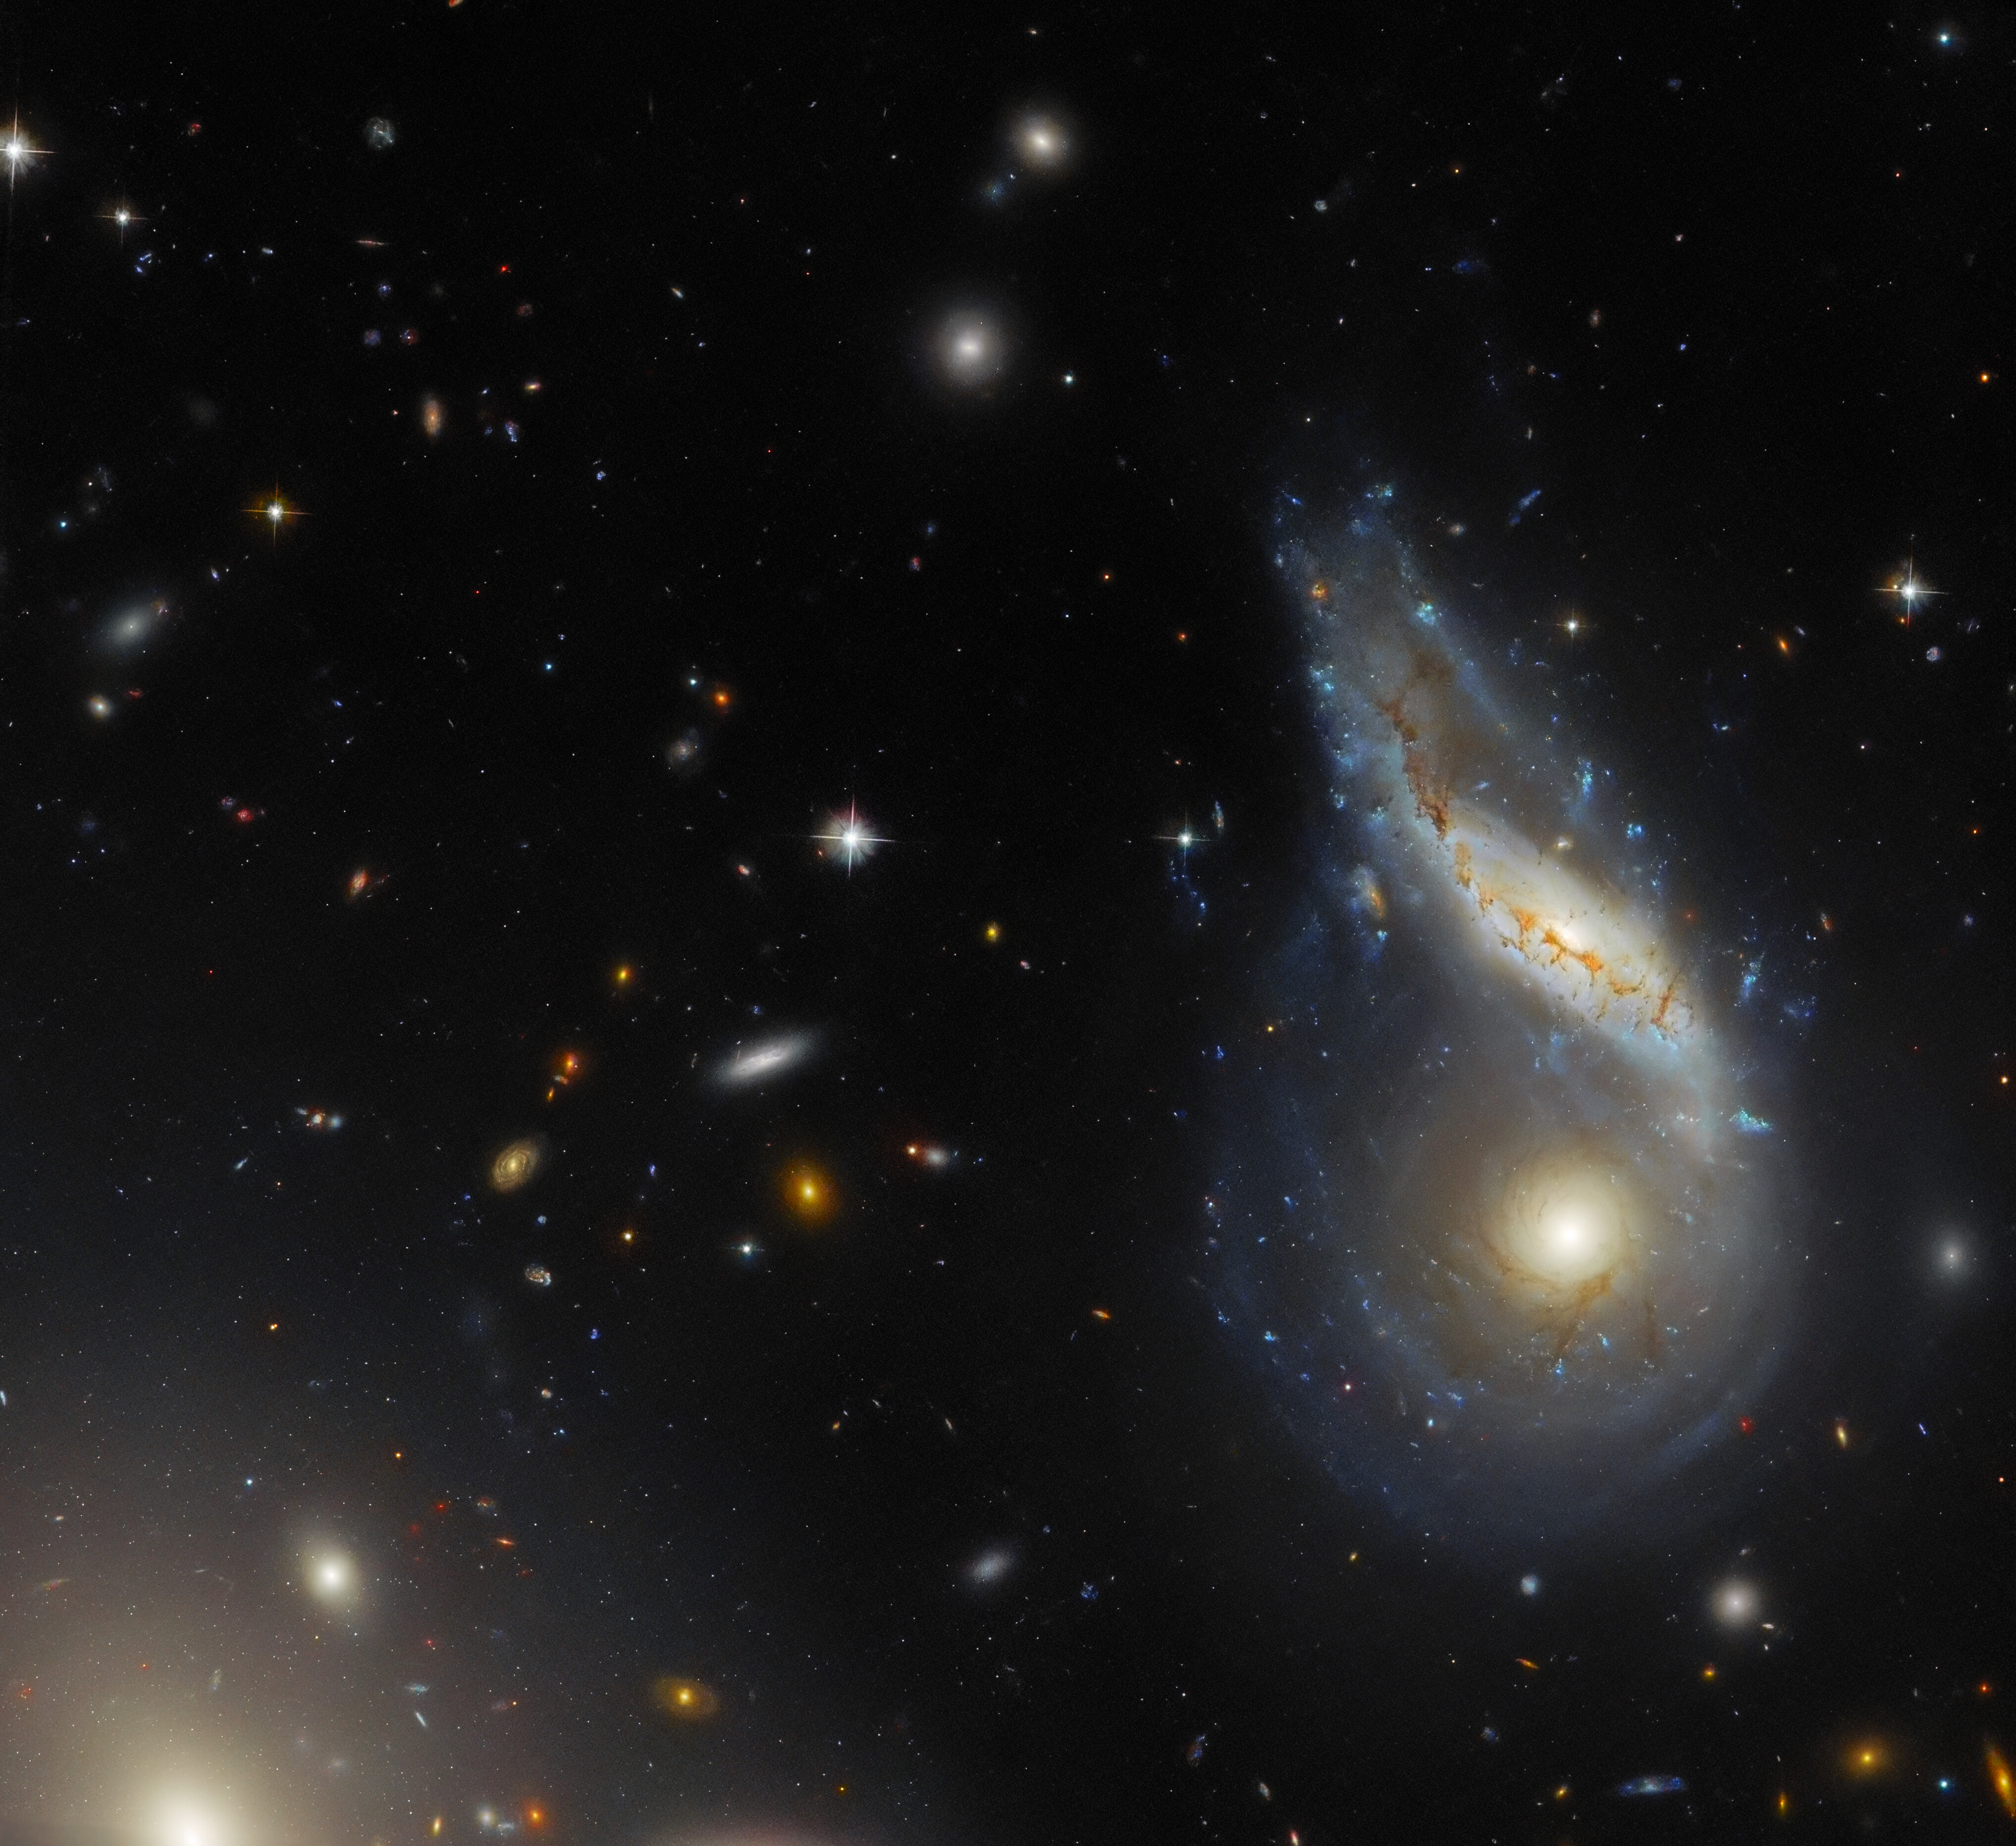 Two spiral galaxies are merging together at the right side of the image. One is seen face-on and is circular in shape. The other seems to lie in front of the first one. This galaxy is seen as a disc tilted away from the viewer and it is partially warped. In the lower-left corner, cut off by the frame, a large elliptical galaxy appears as light radiating from a point. Various small galaxies cover the background.